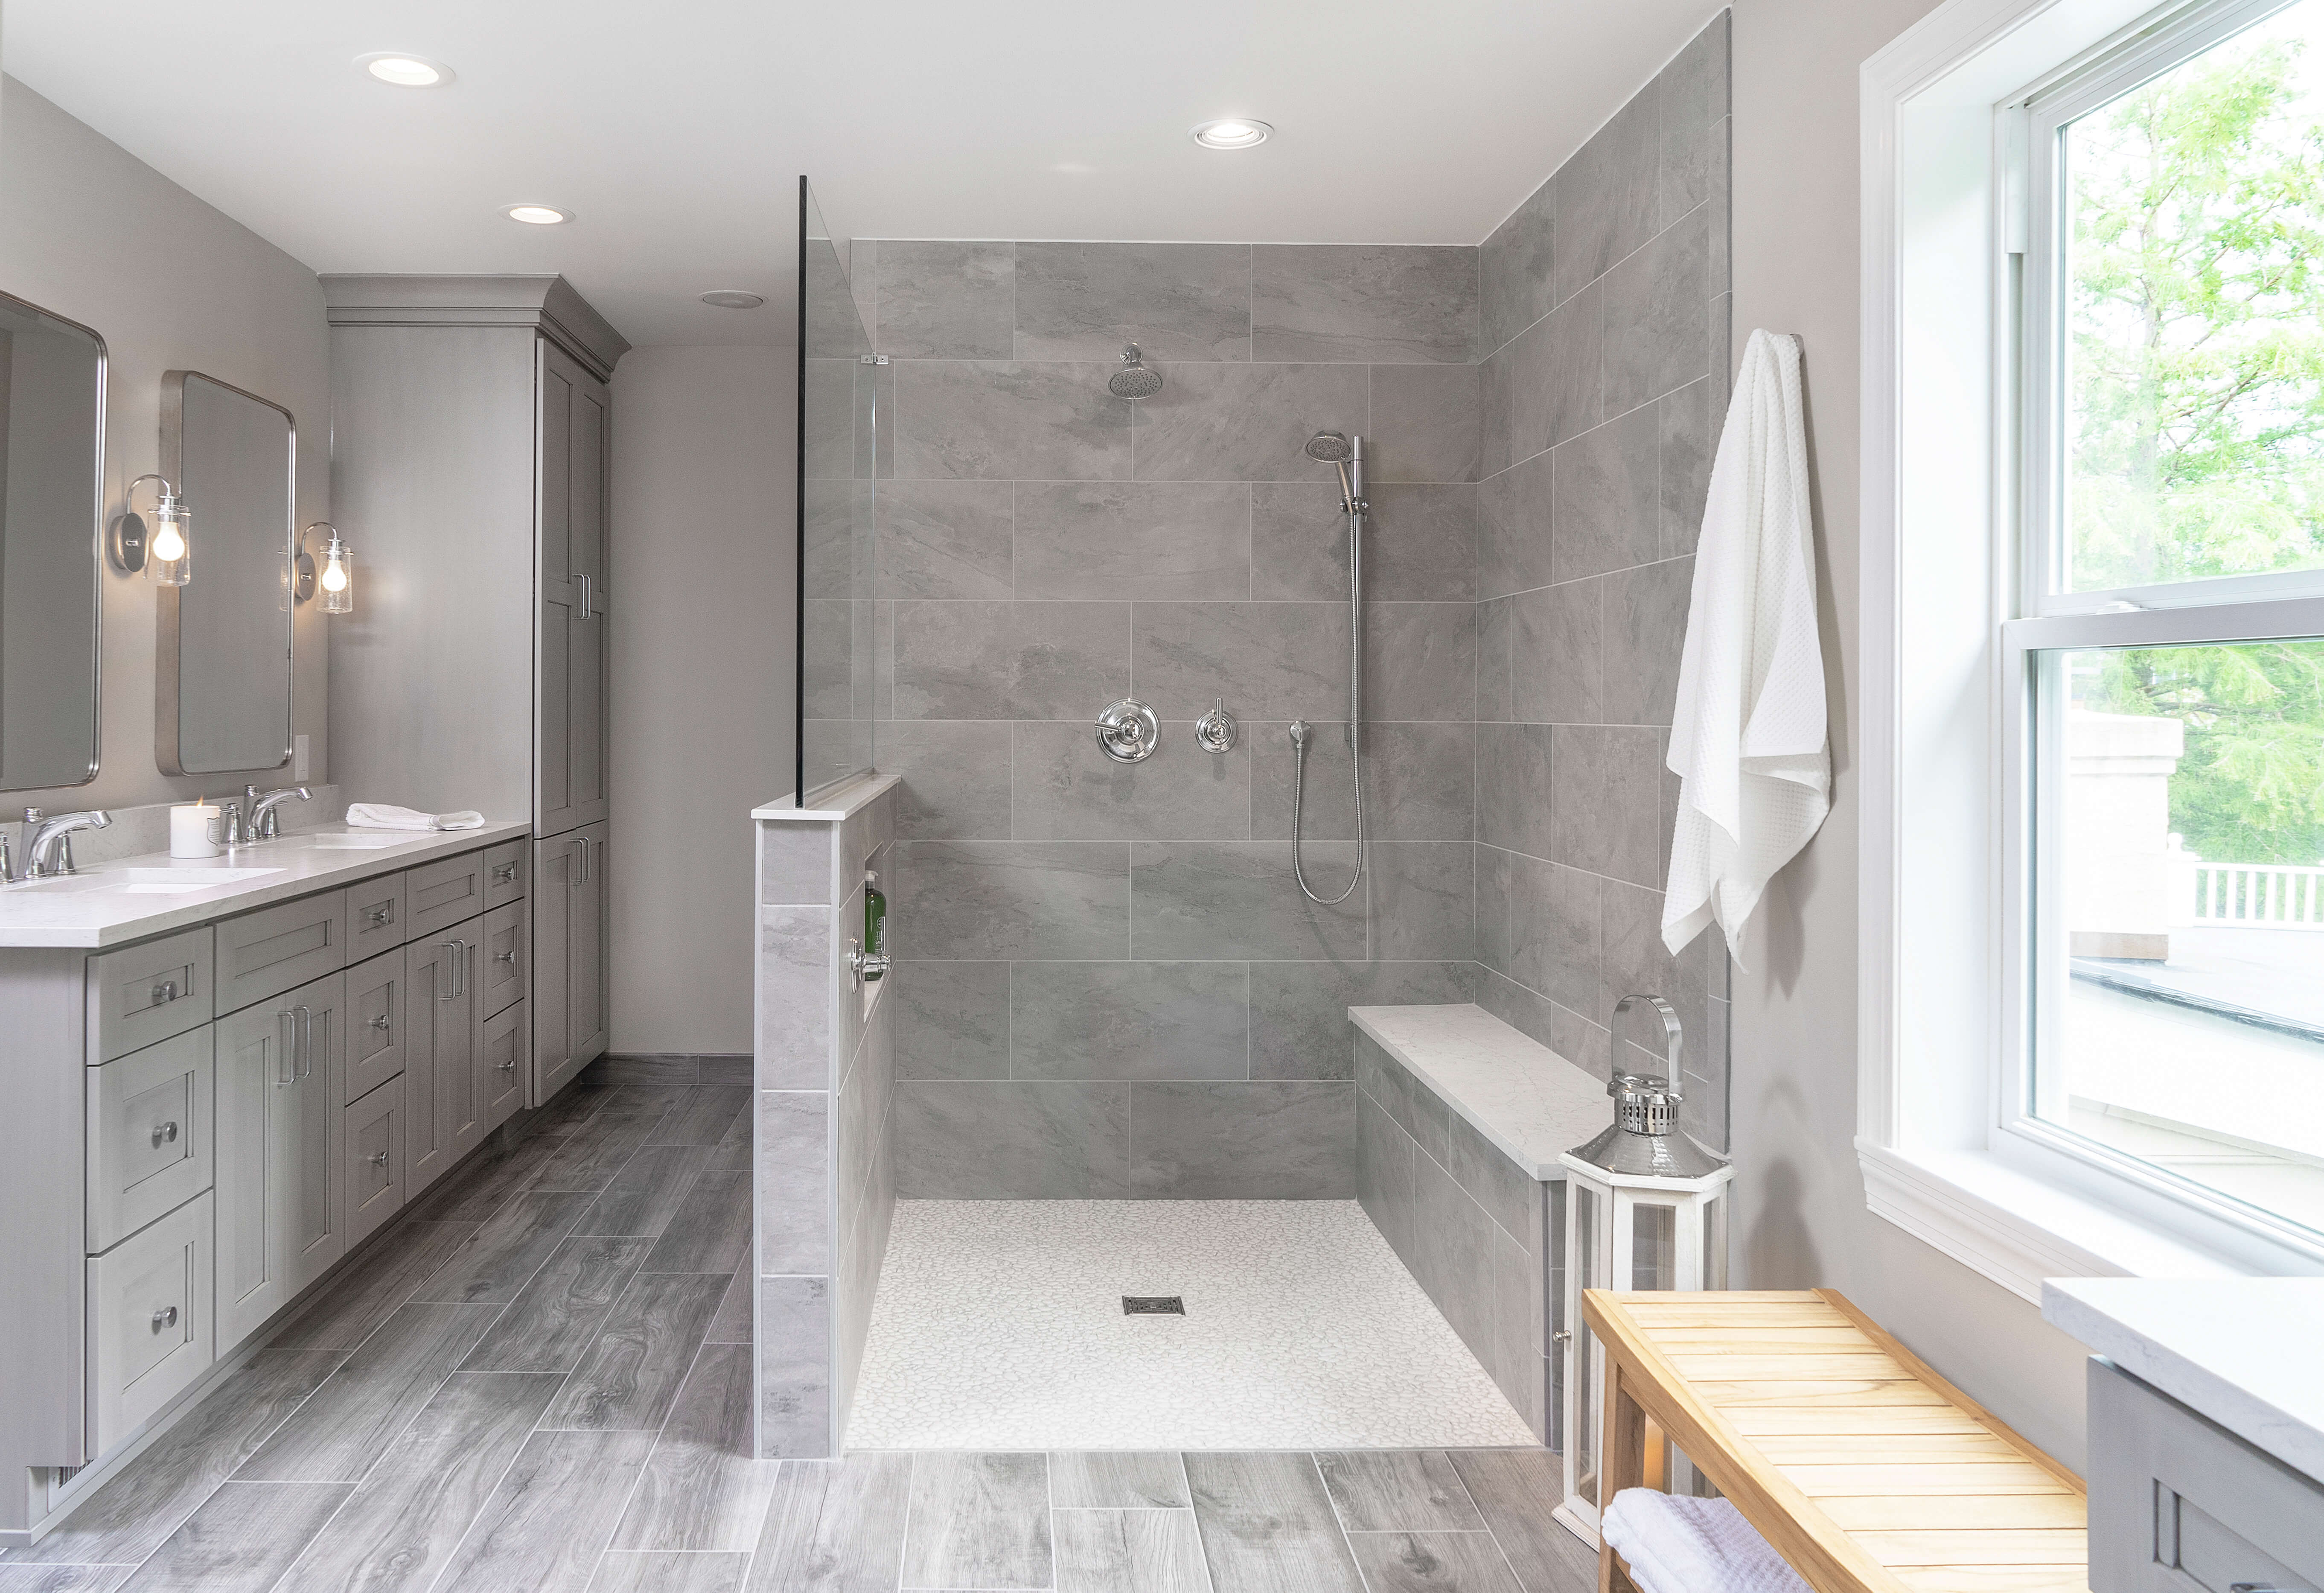 A beautiful master bathroom with a light gray vanity and walk-in shower.